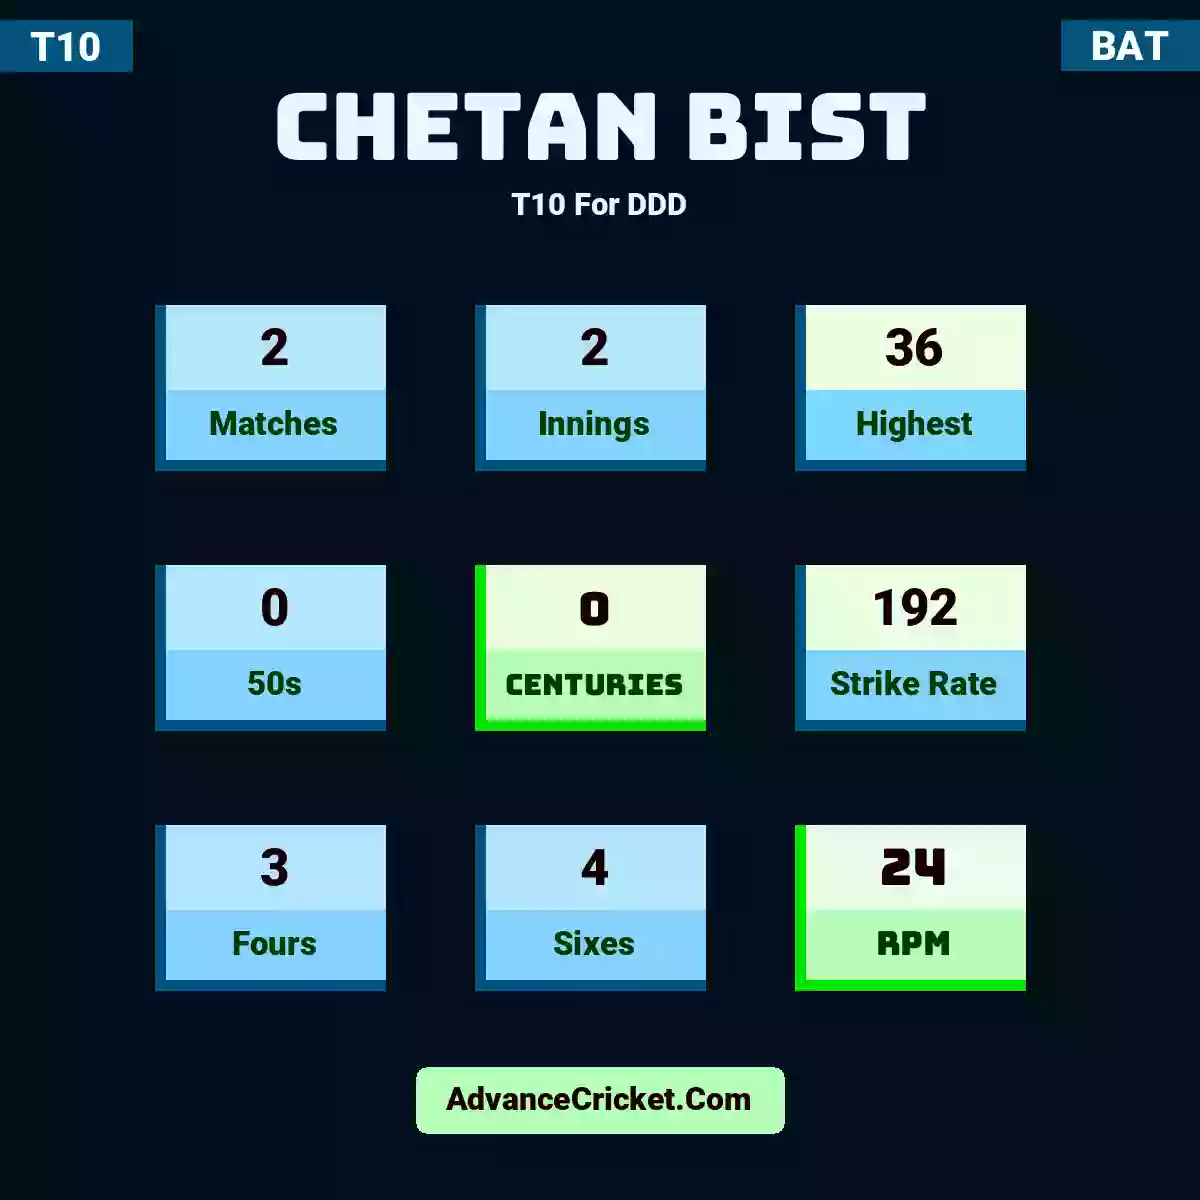 Chetan Bist T10  For DDD, Chetan Bist played 2 matches, scored 36 runs as highest, 0 half-centuries, and 0 centuries, with a strike rate of 192. C.Bist hit 3 fours and 4 sixes, with an RPM of 24.